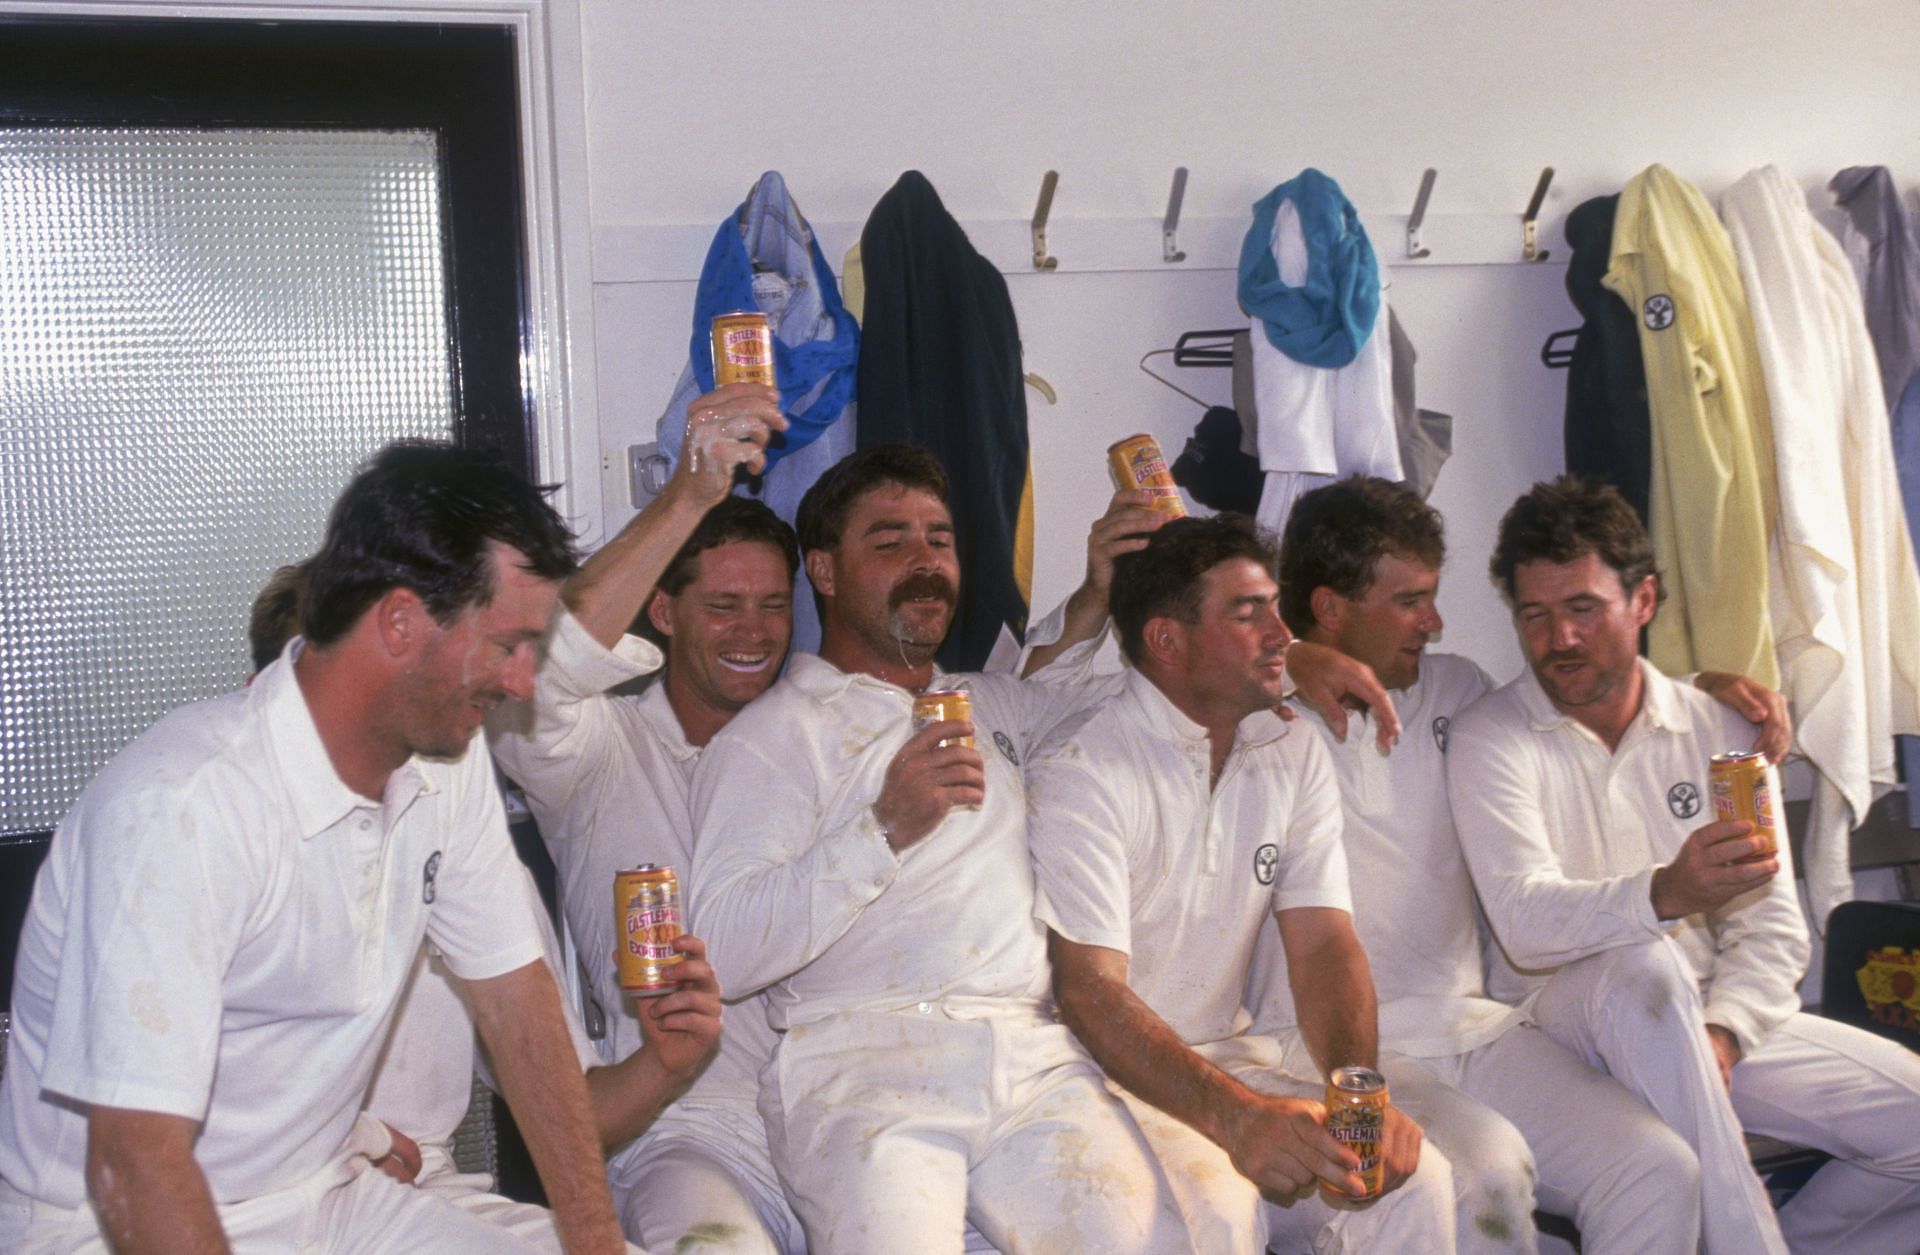 Australia celebrate after winning the 1989 Headingley Test. (Pic: Getty Images)